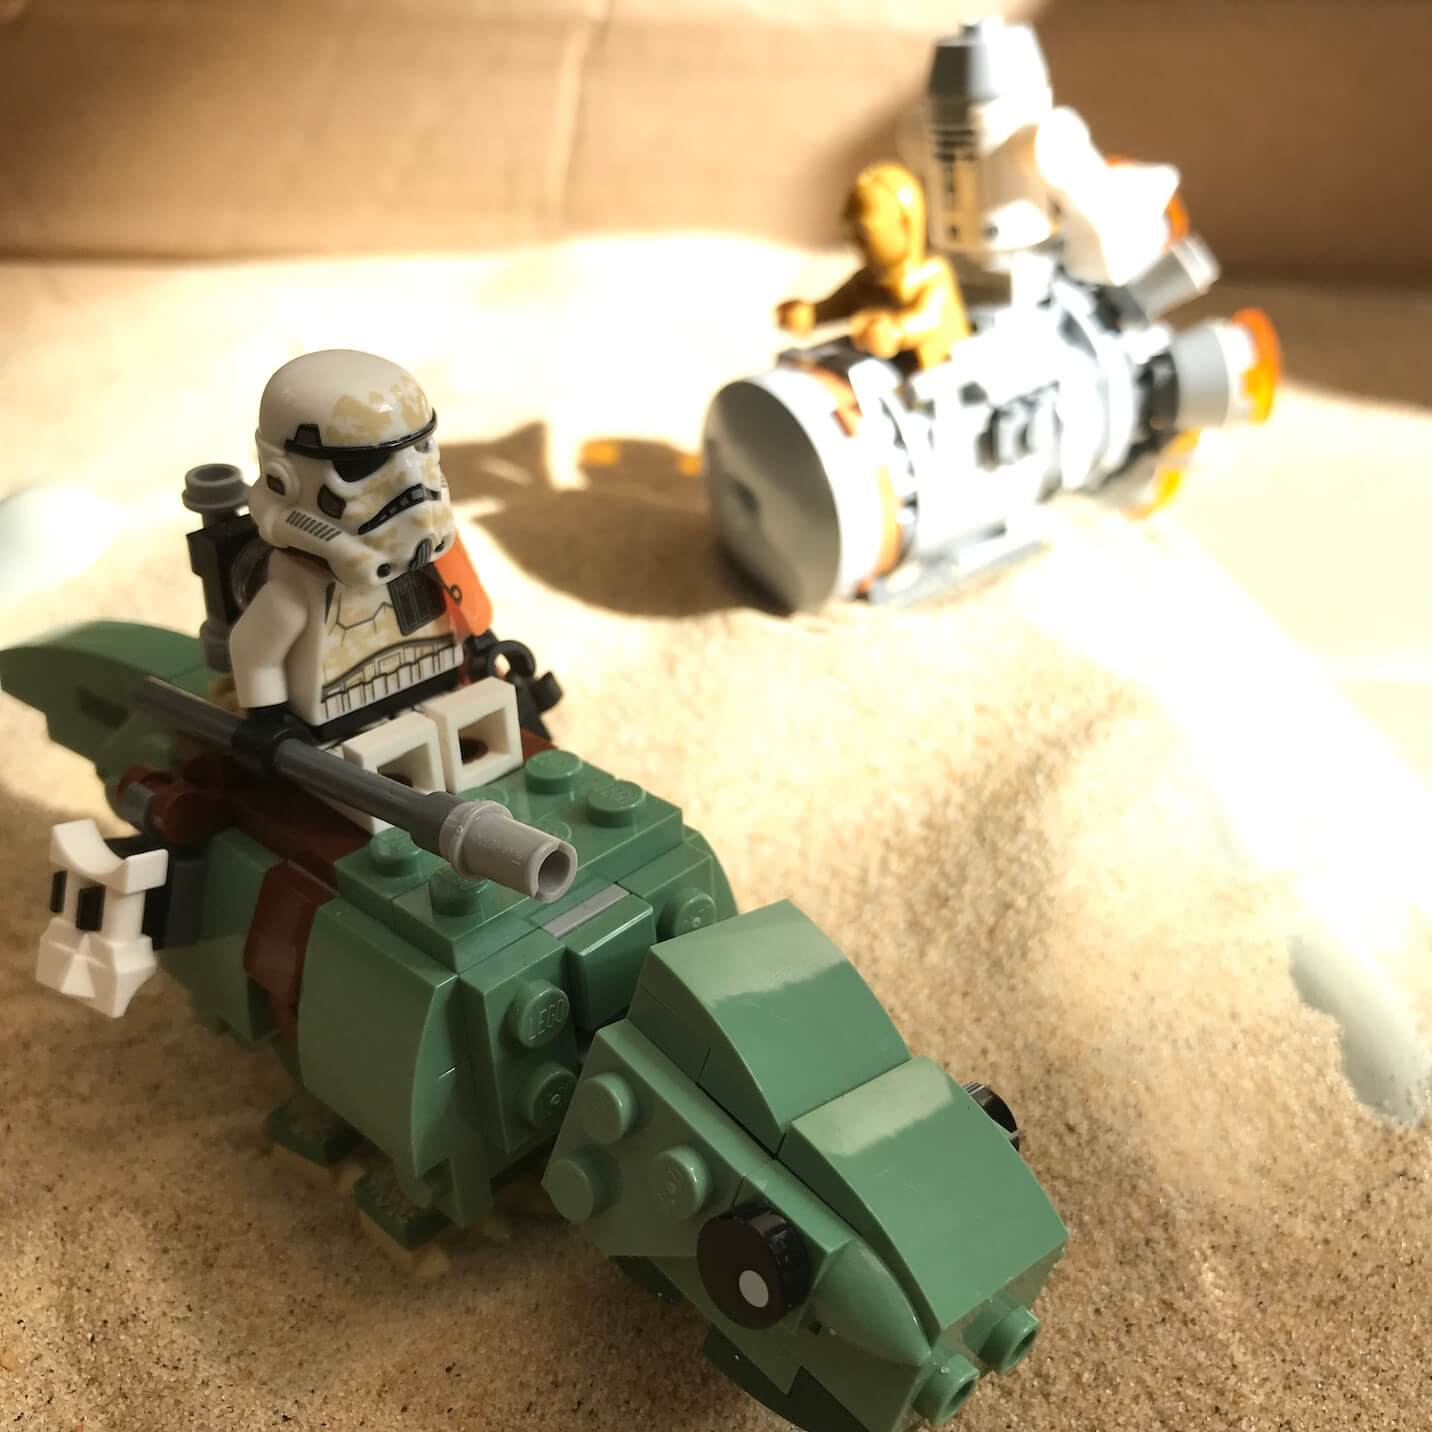 Lego Star Wars figures being used to demonstrate process vs procedure